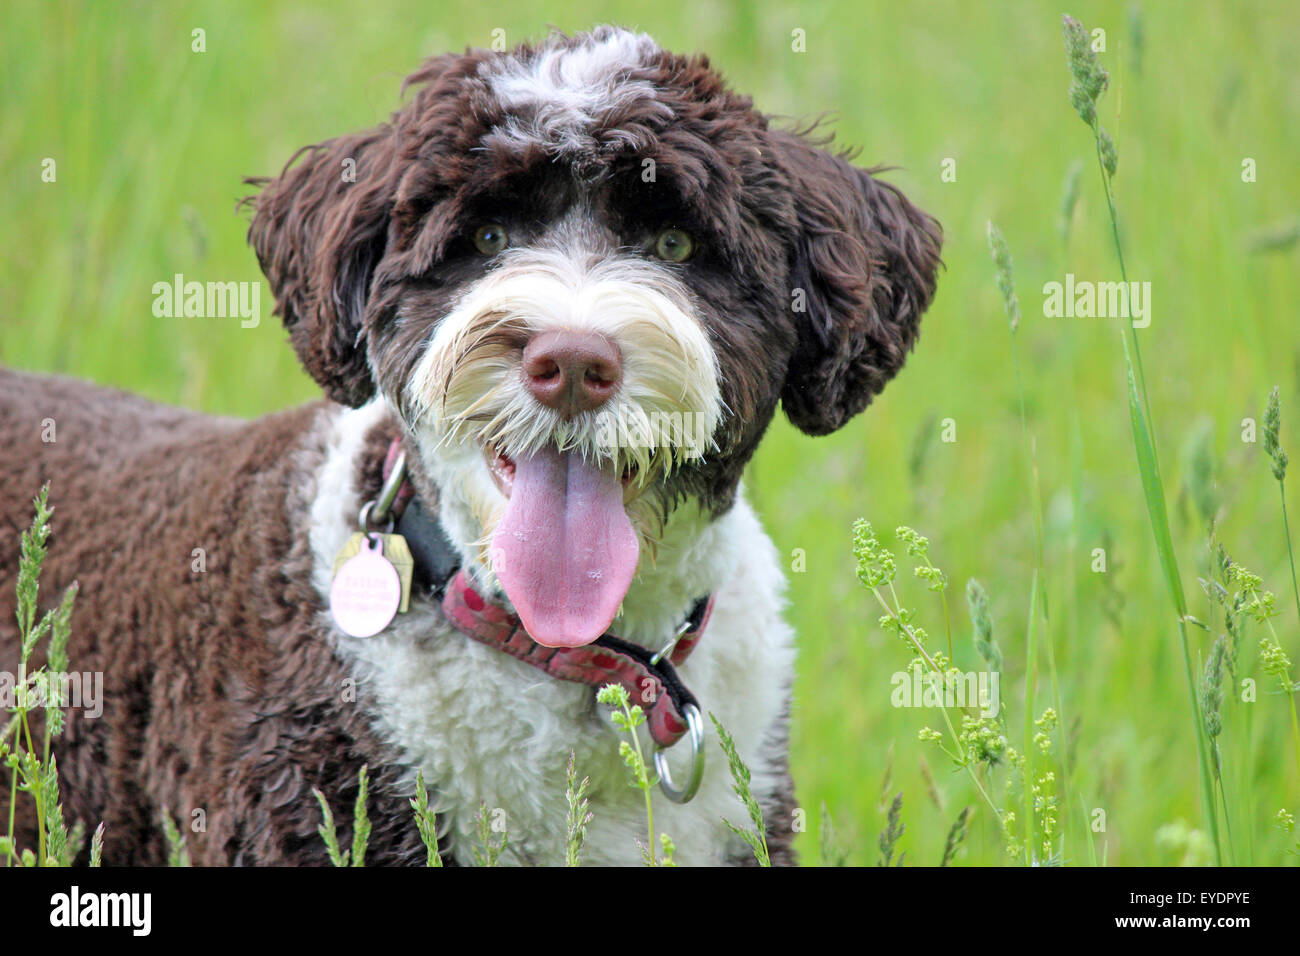 A Brown And White Portuguese Water Dog Wearing A Collar And Tags In A Stock Photo Alamy